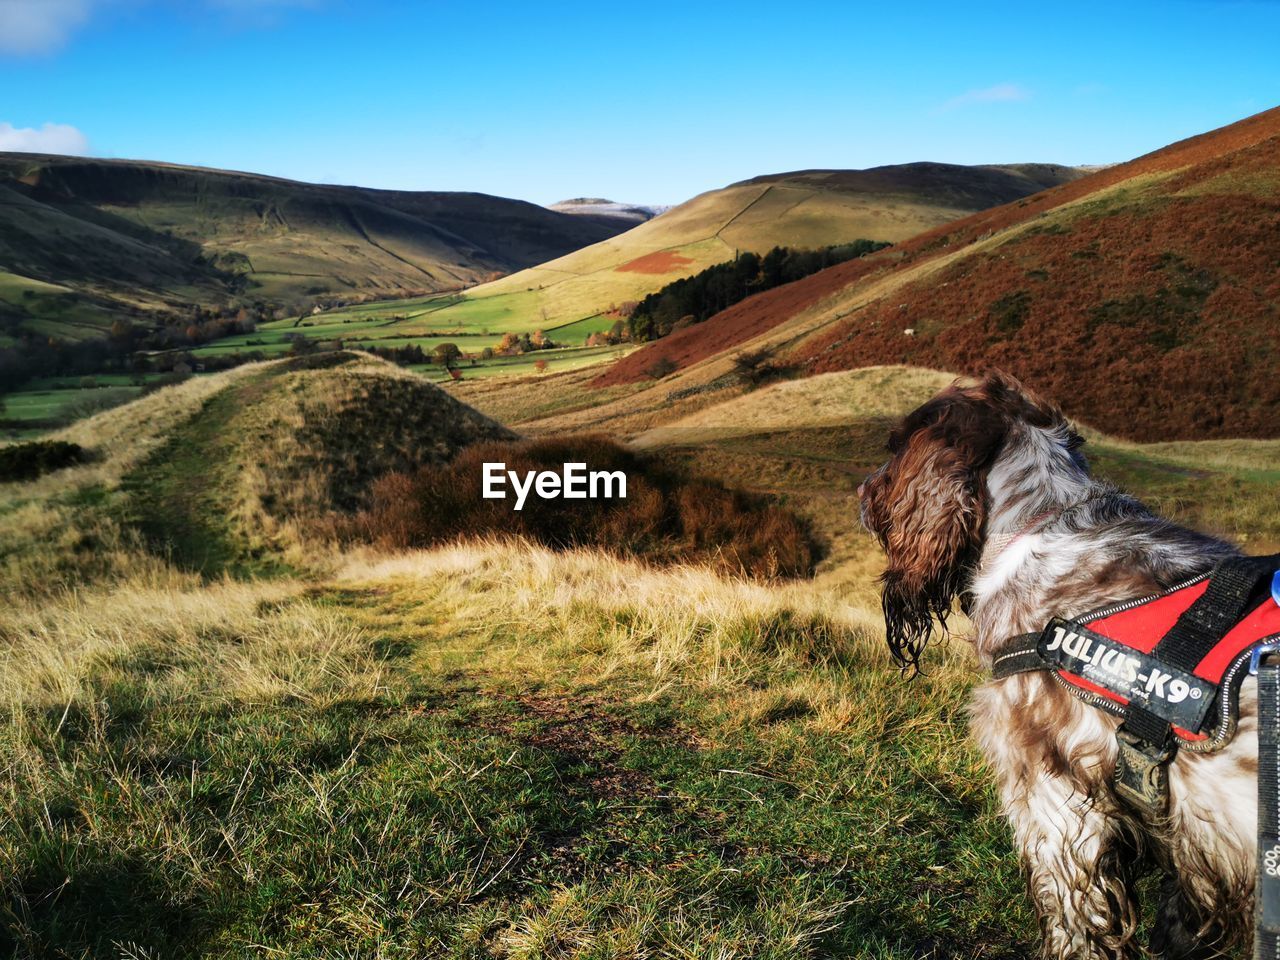 VIEW OF DOG ON FIELD BY MOUNTAIN